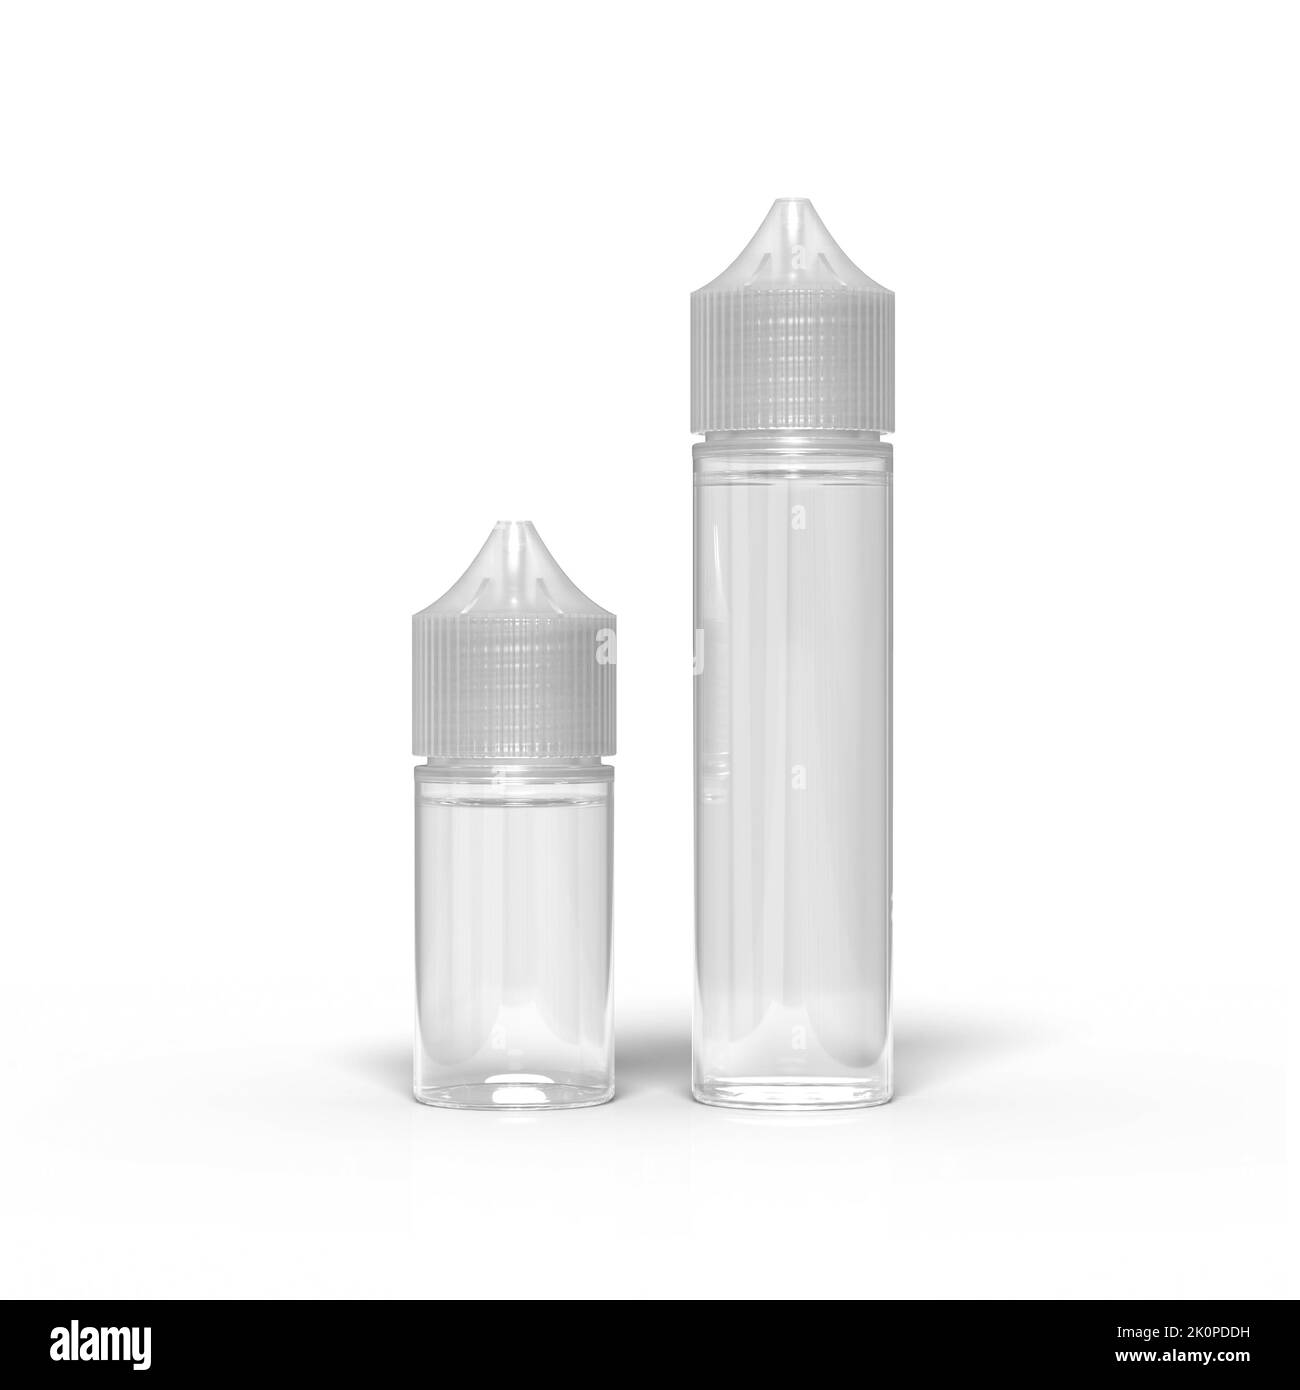 30ml and 60ml Unicorn Vape Juice Bottle filled with clear liquid, isolated on a white background. 3D render illustration. Stock Photo